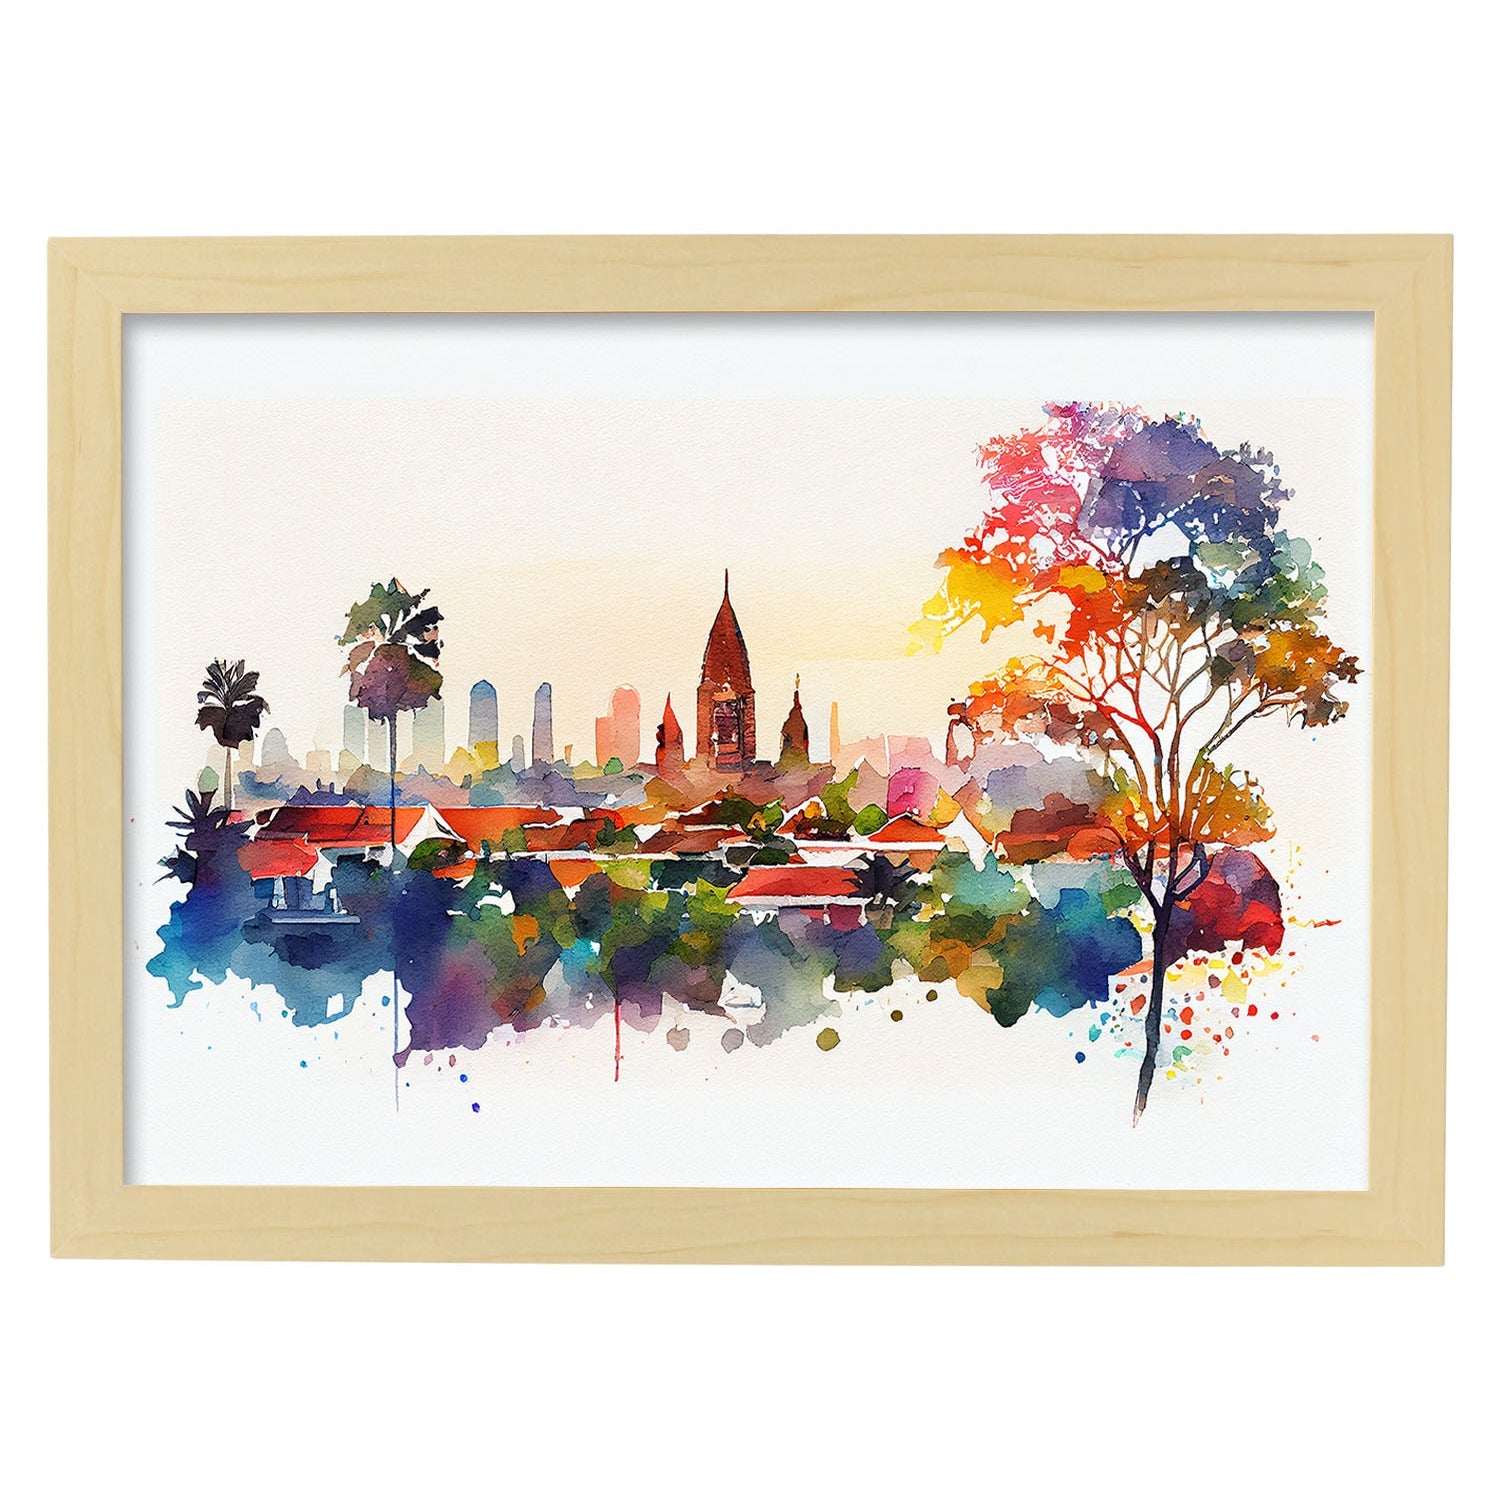 Nacnic watercolor of a skyline of the city of Bali_1. Aesthetic Wall Art Prints for Bedroom or Living Room Design.-Artwork-Nacnic-A4-Marco Madera Clara-Nacnic Estudio SL